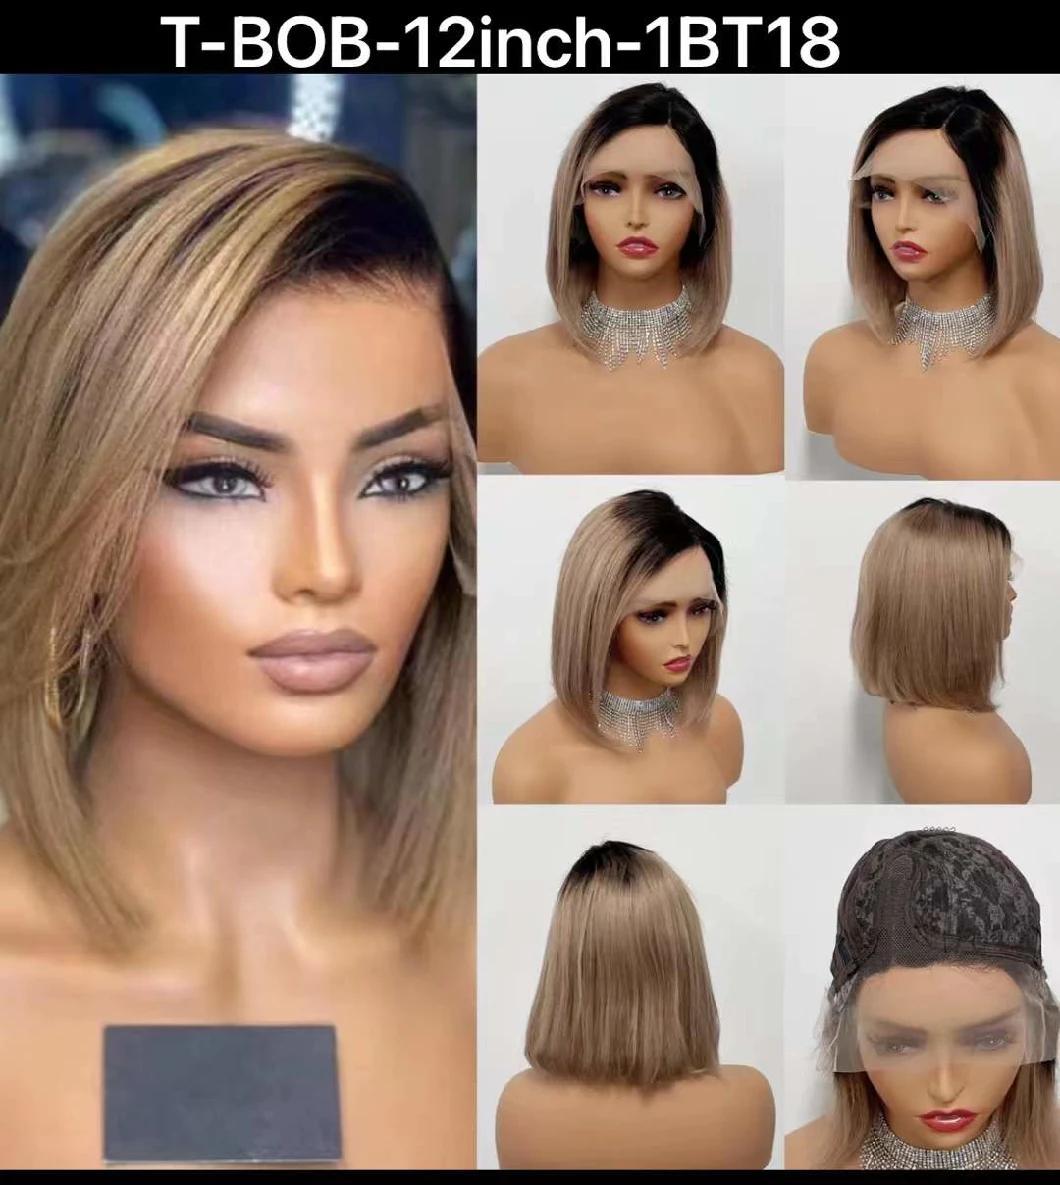 Wholesale Peruvian Bob Wigs Lace Front, High Quality 8-16 Inch Peruvian Bob Wig, Natural Virgin Remy Front Lace Wig Human Hair